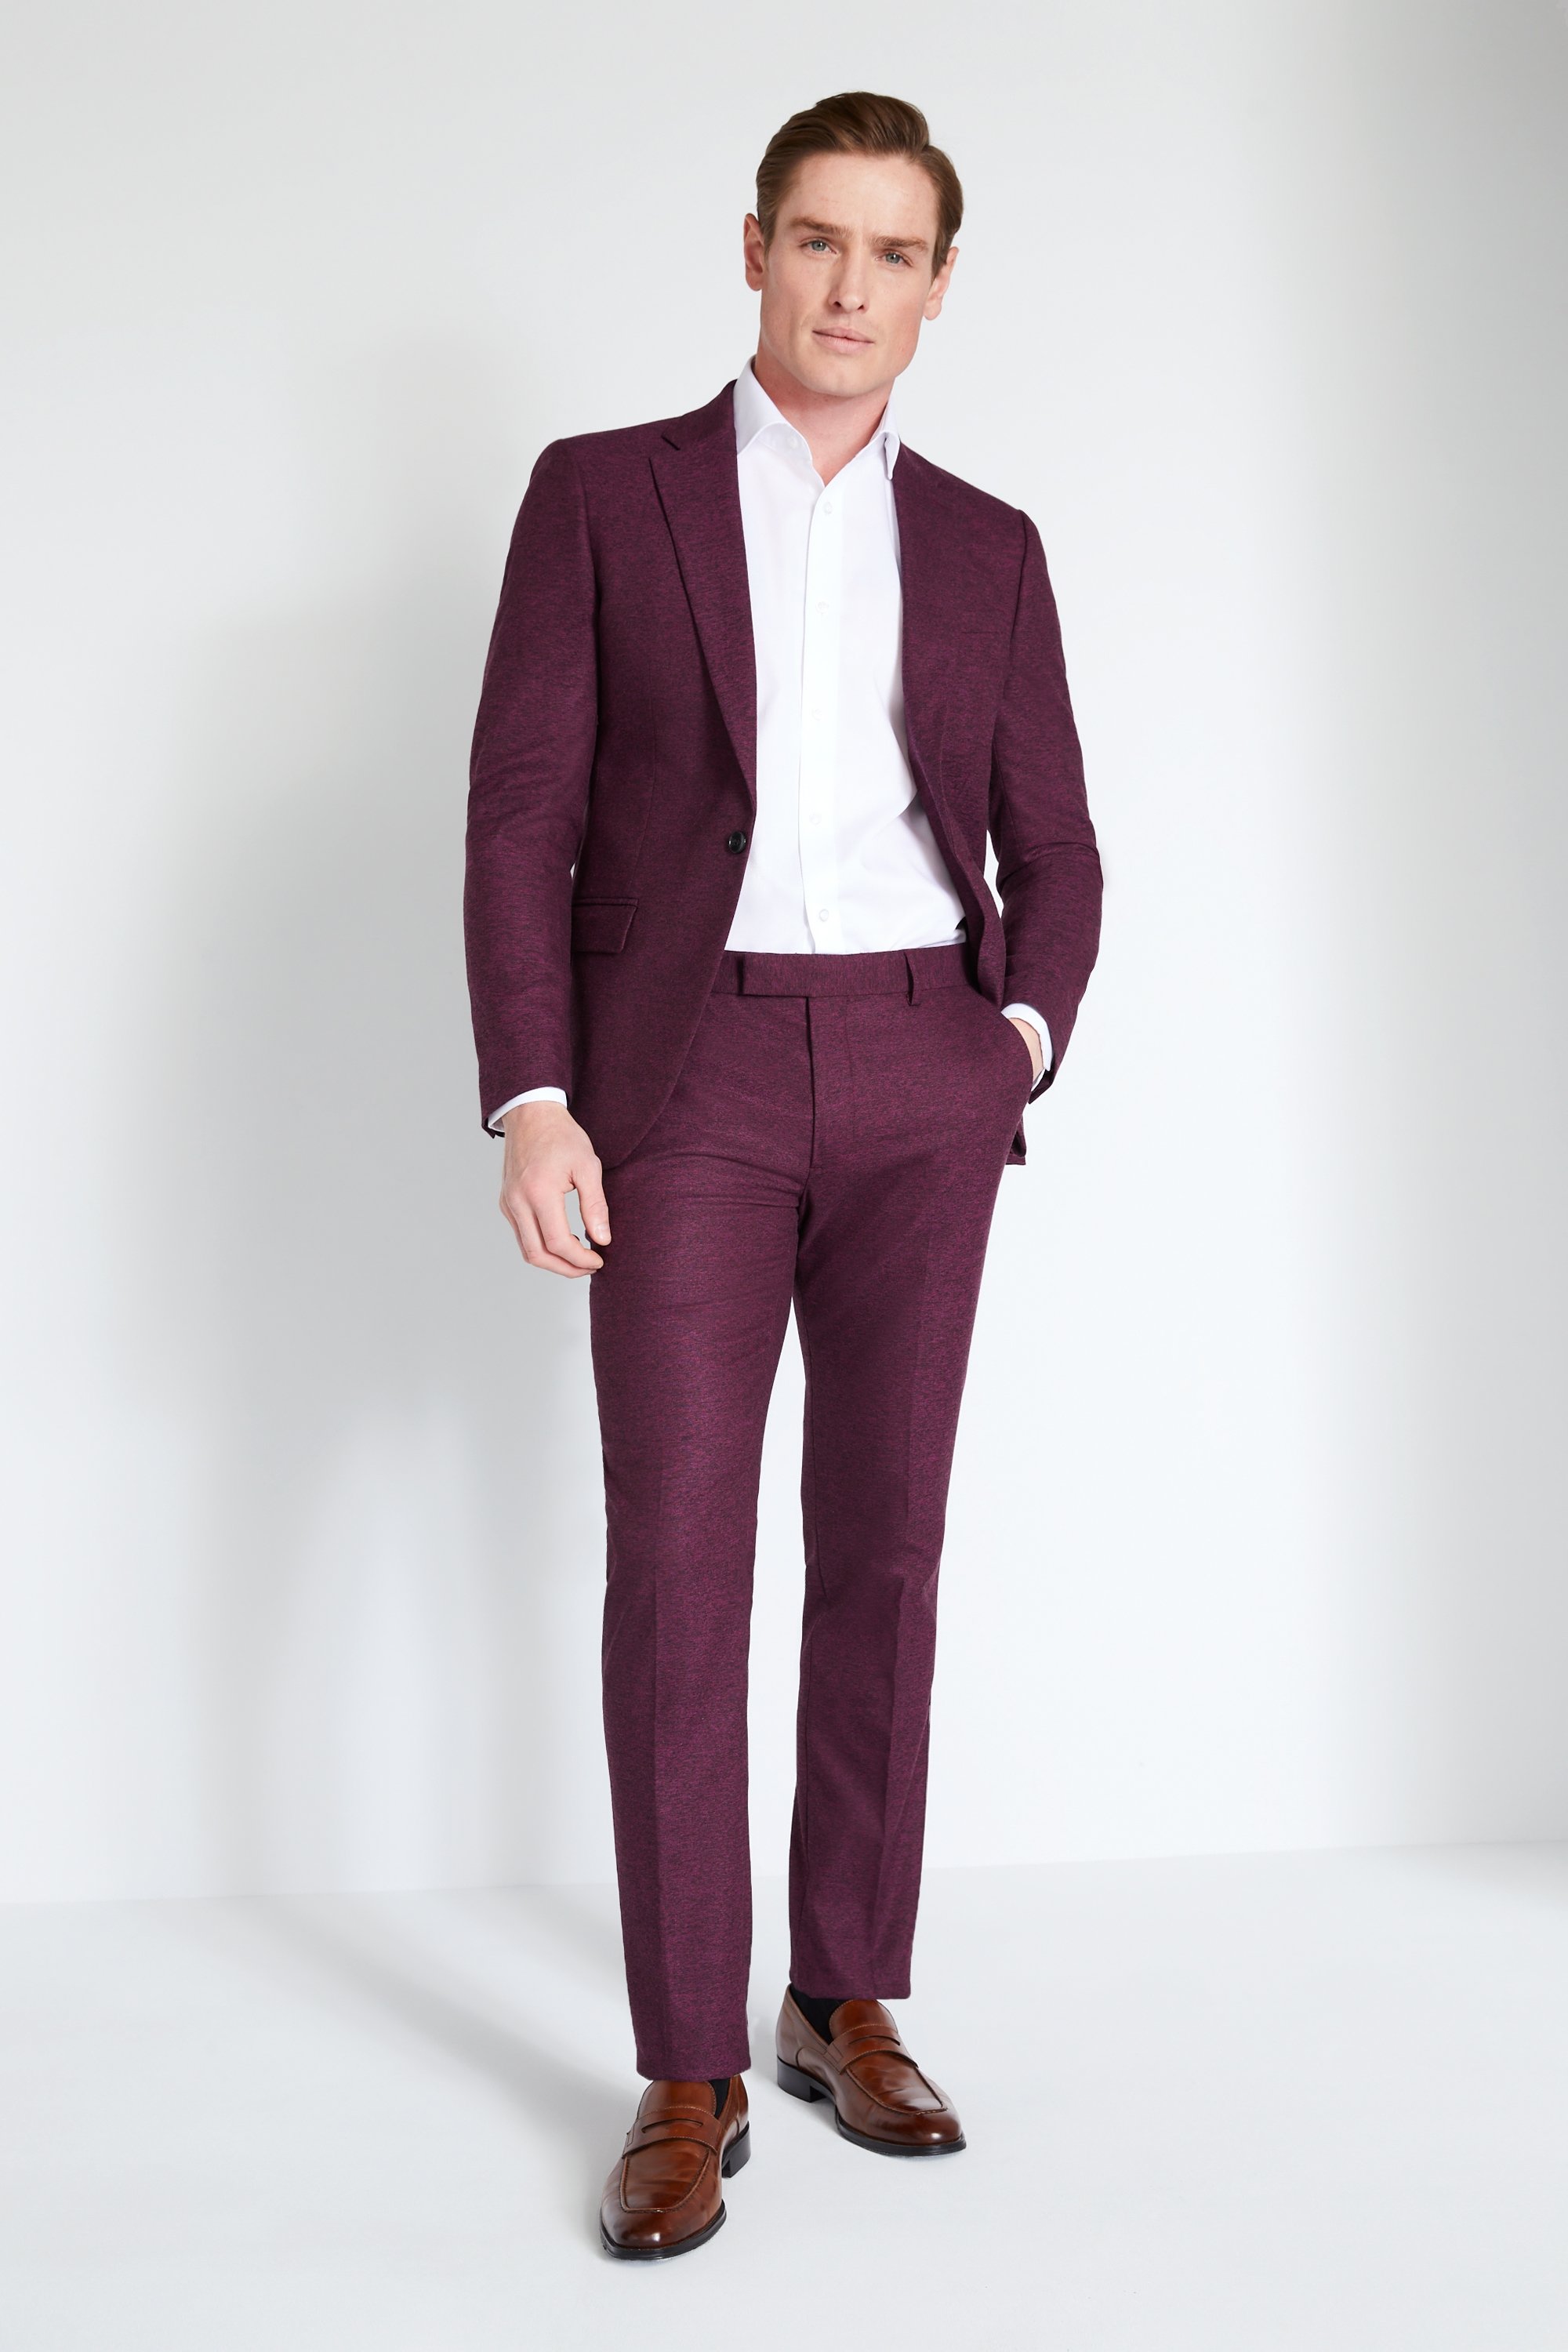 Slim Fit Fuchsia Berry Jacket | Buy Online at Moss